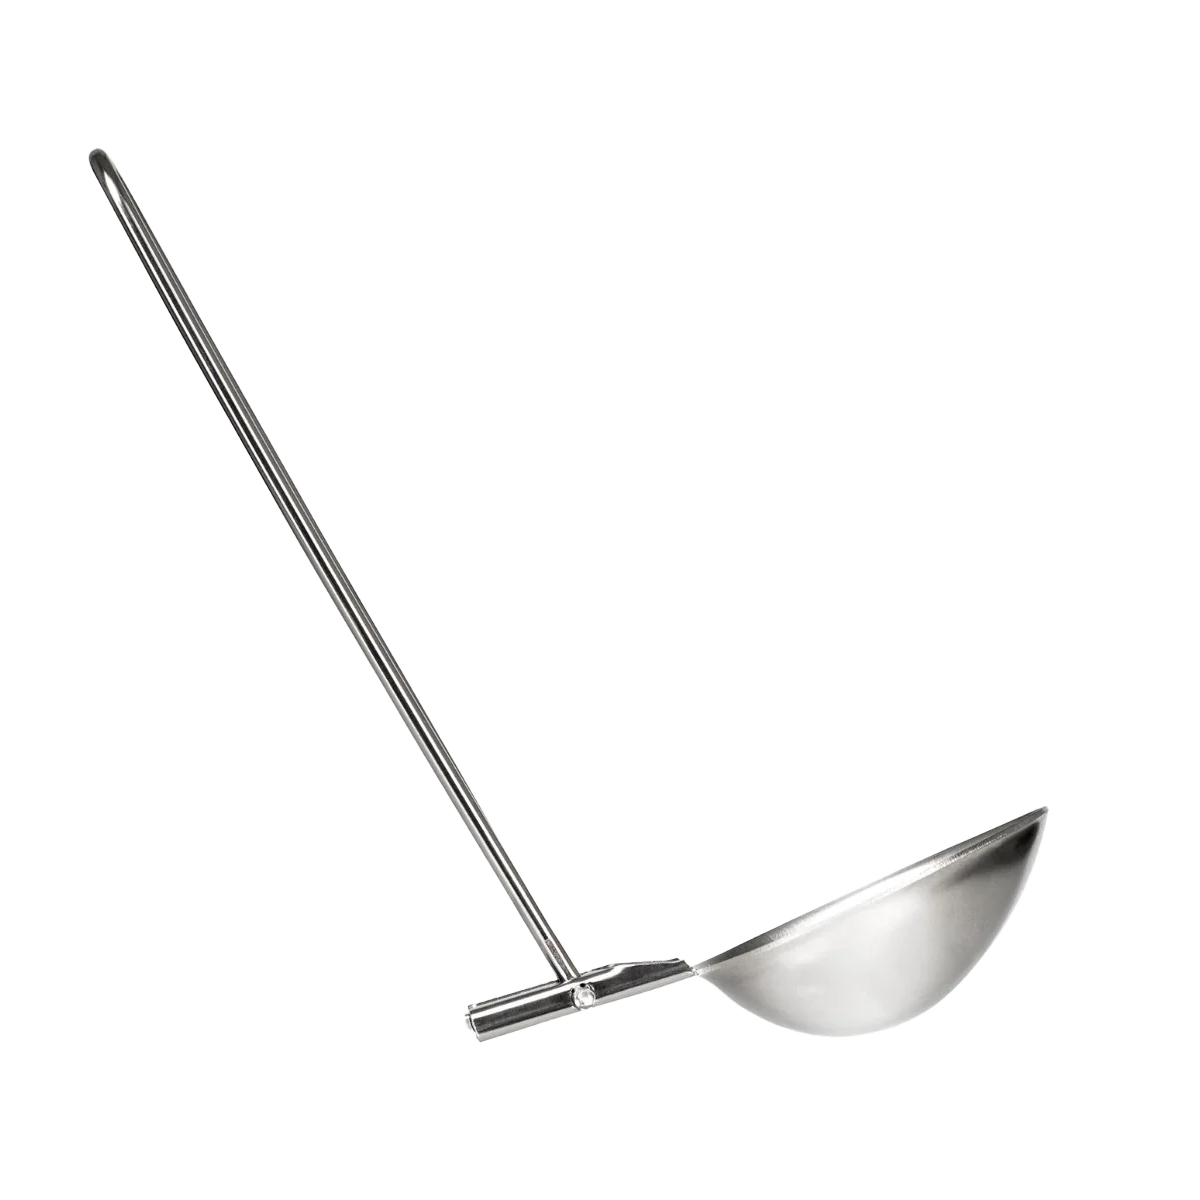 Glacier Stainless Chef Spoon/Ladle alternate view